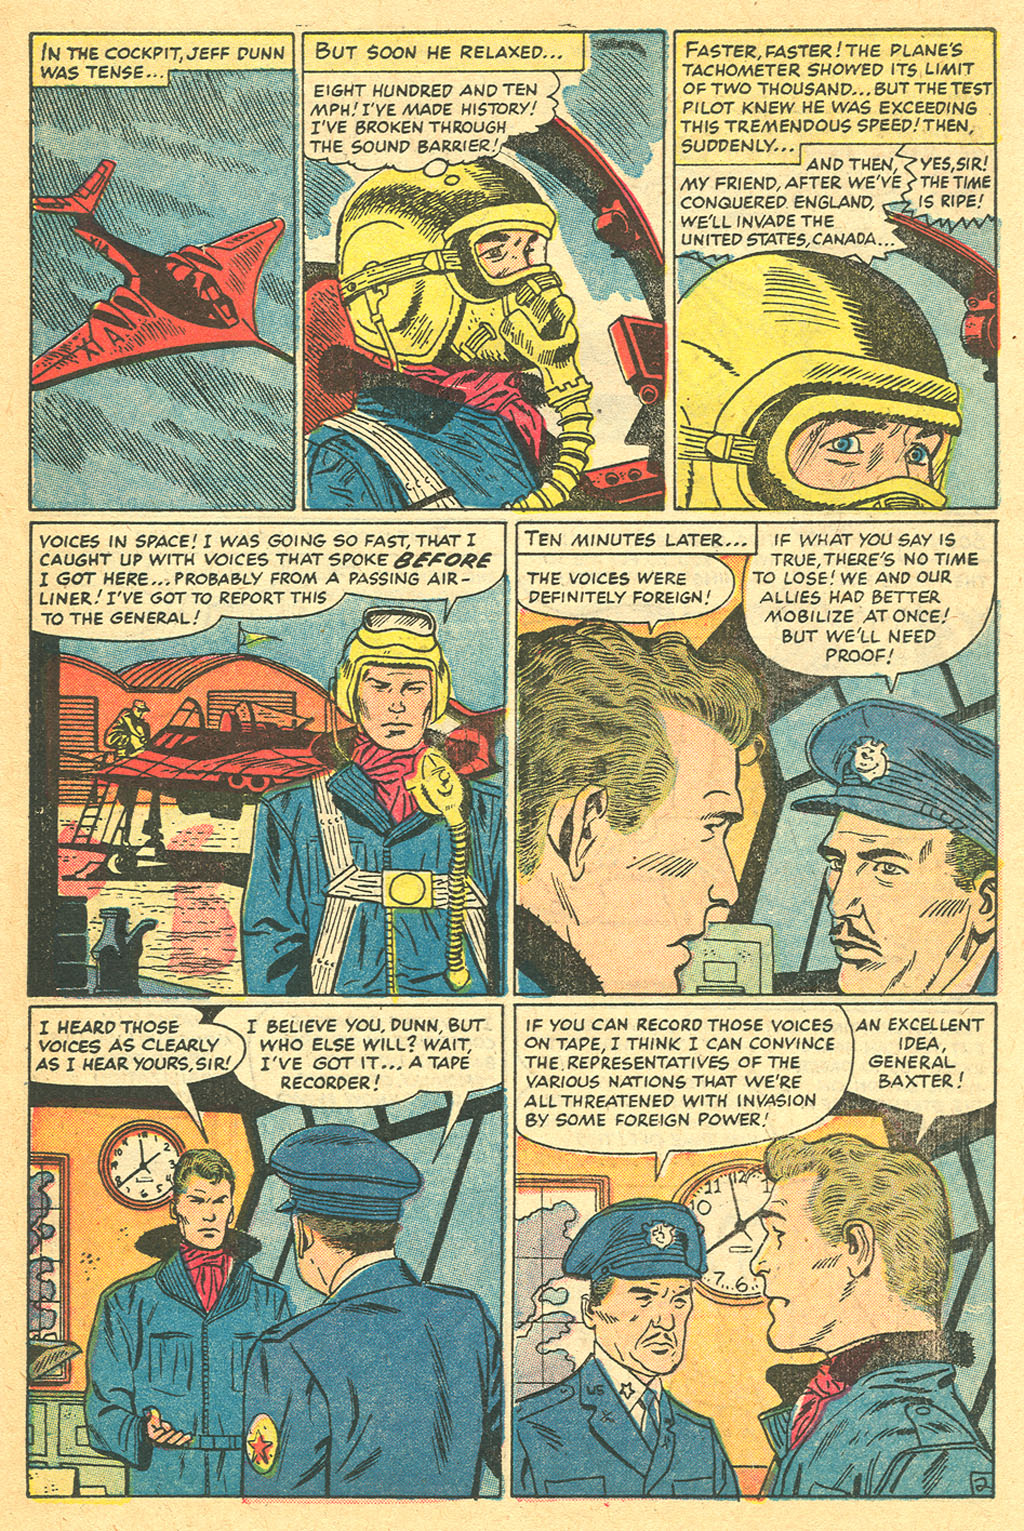 Marvel Tales (1949) 139 Page 10